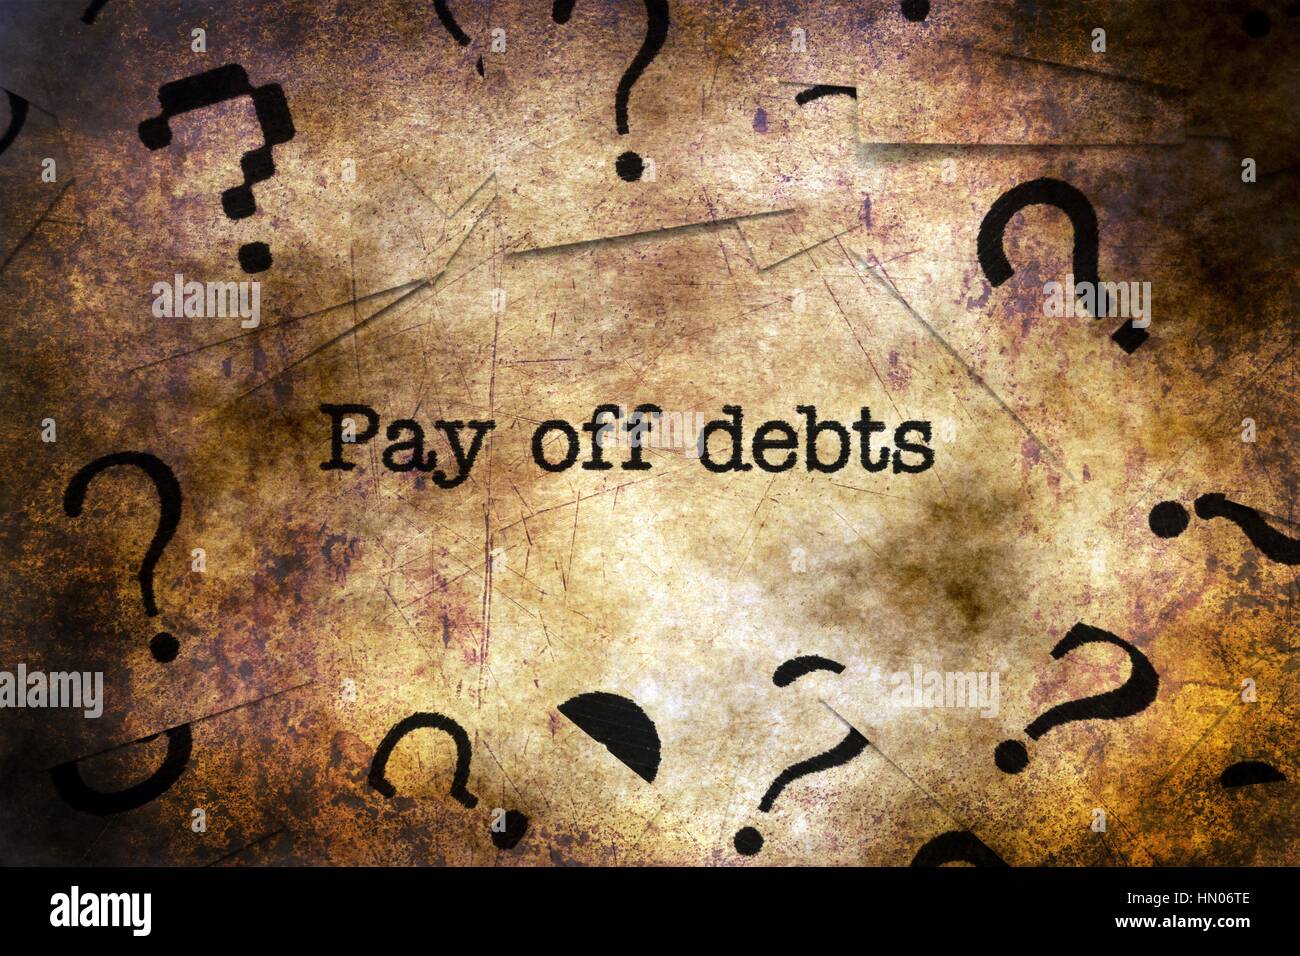 Pay off debts grunge concept Stock Photo